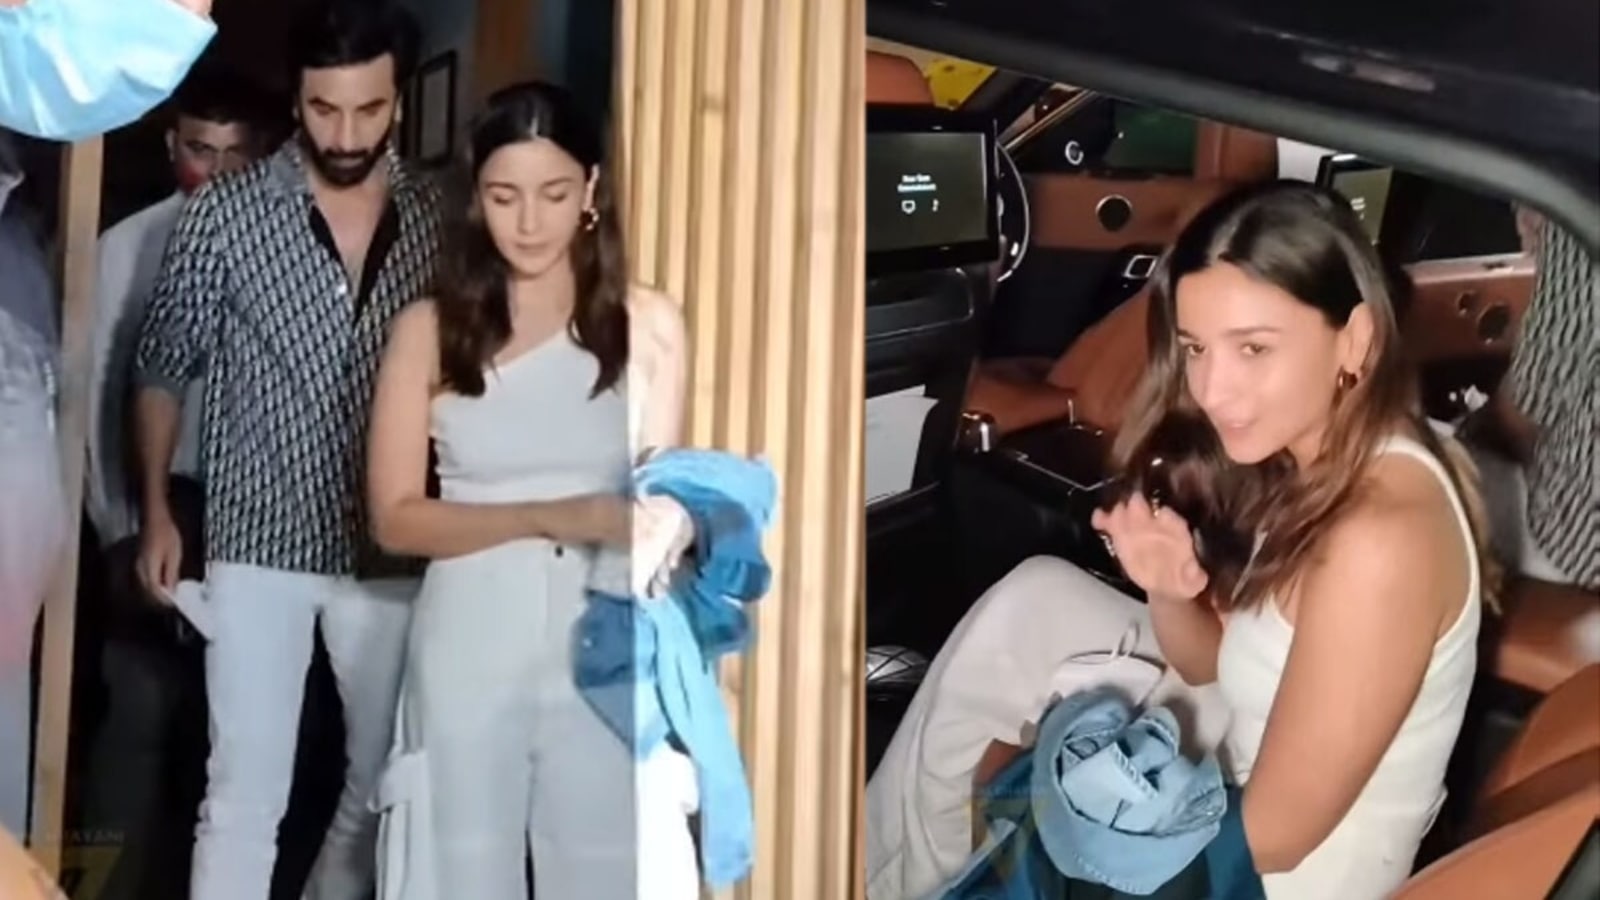 Alia Bhatt Fuck Videos - Alia and Ranbir step out for dinner, fans see her blushing. Watch |  Bollywood - Hindustan Times